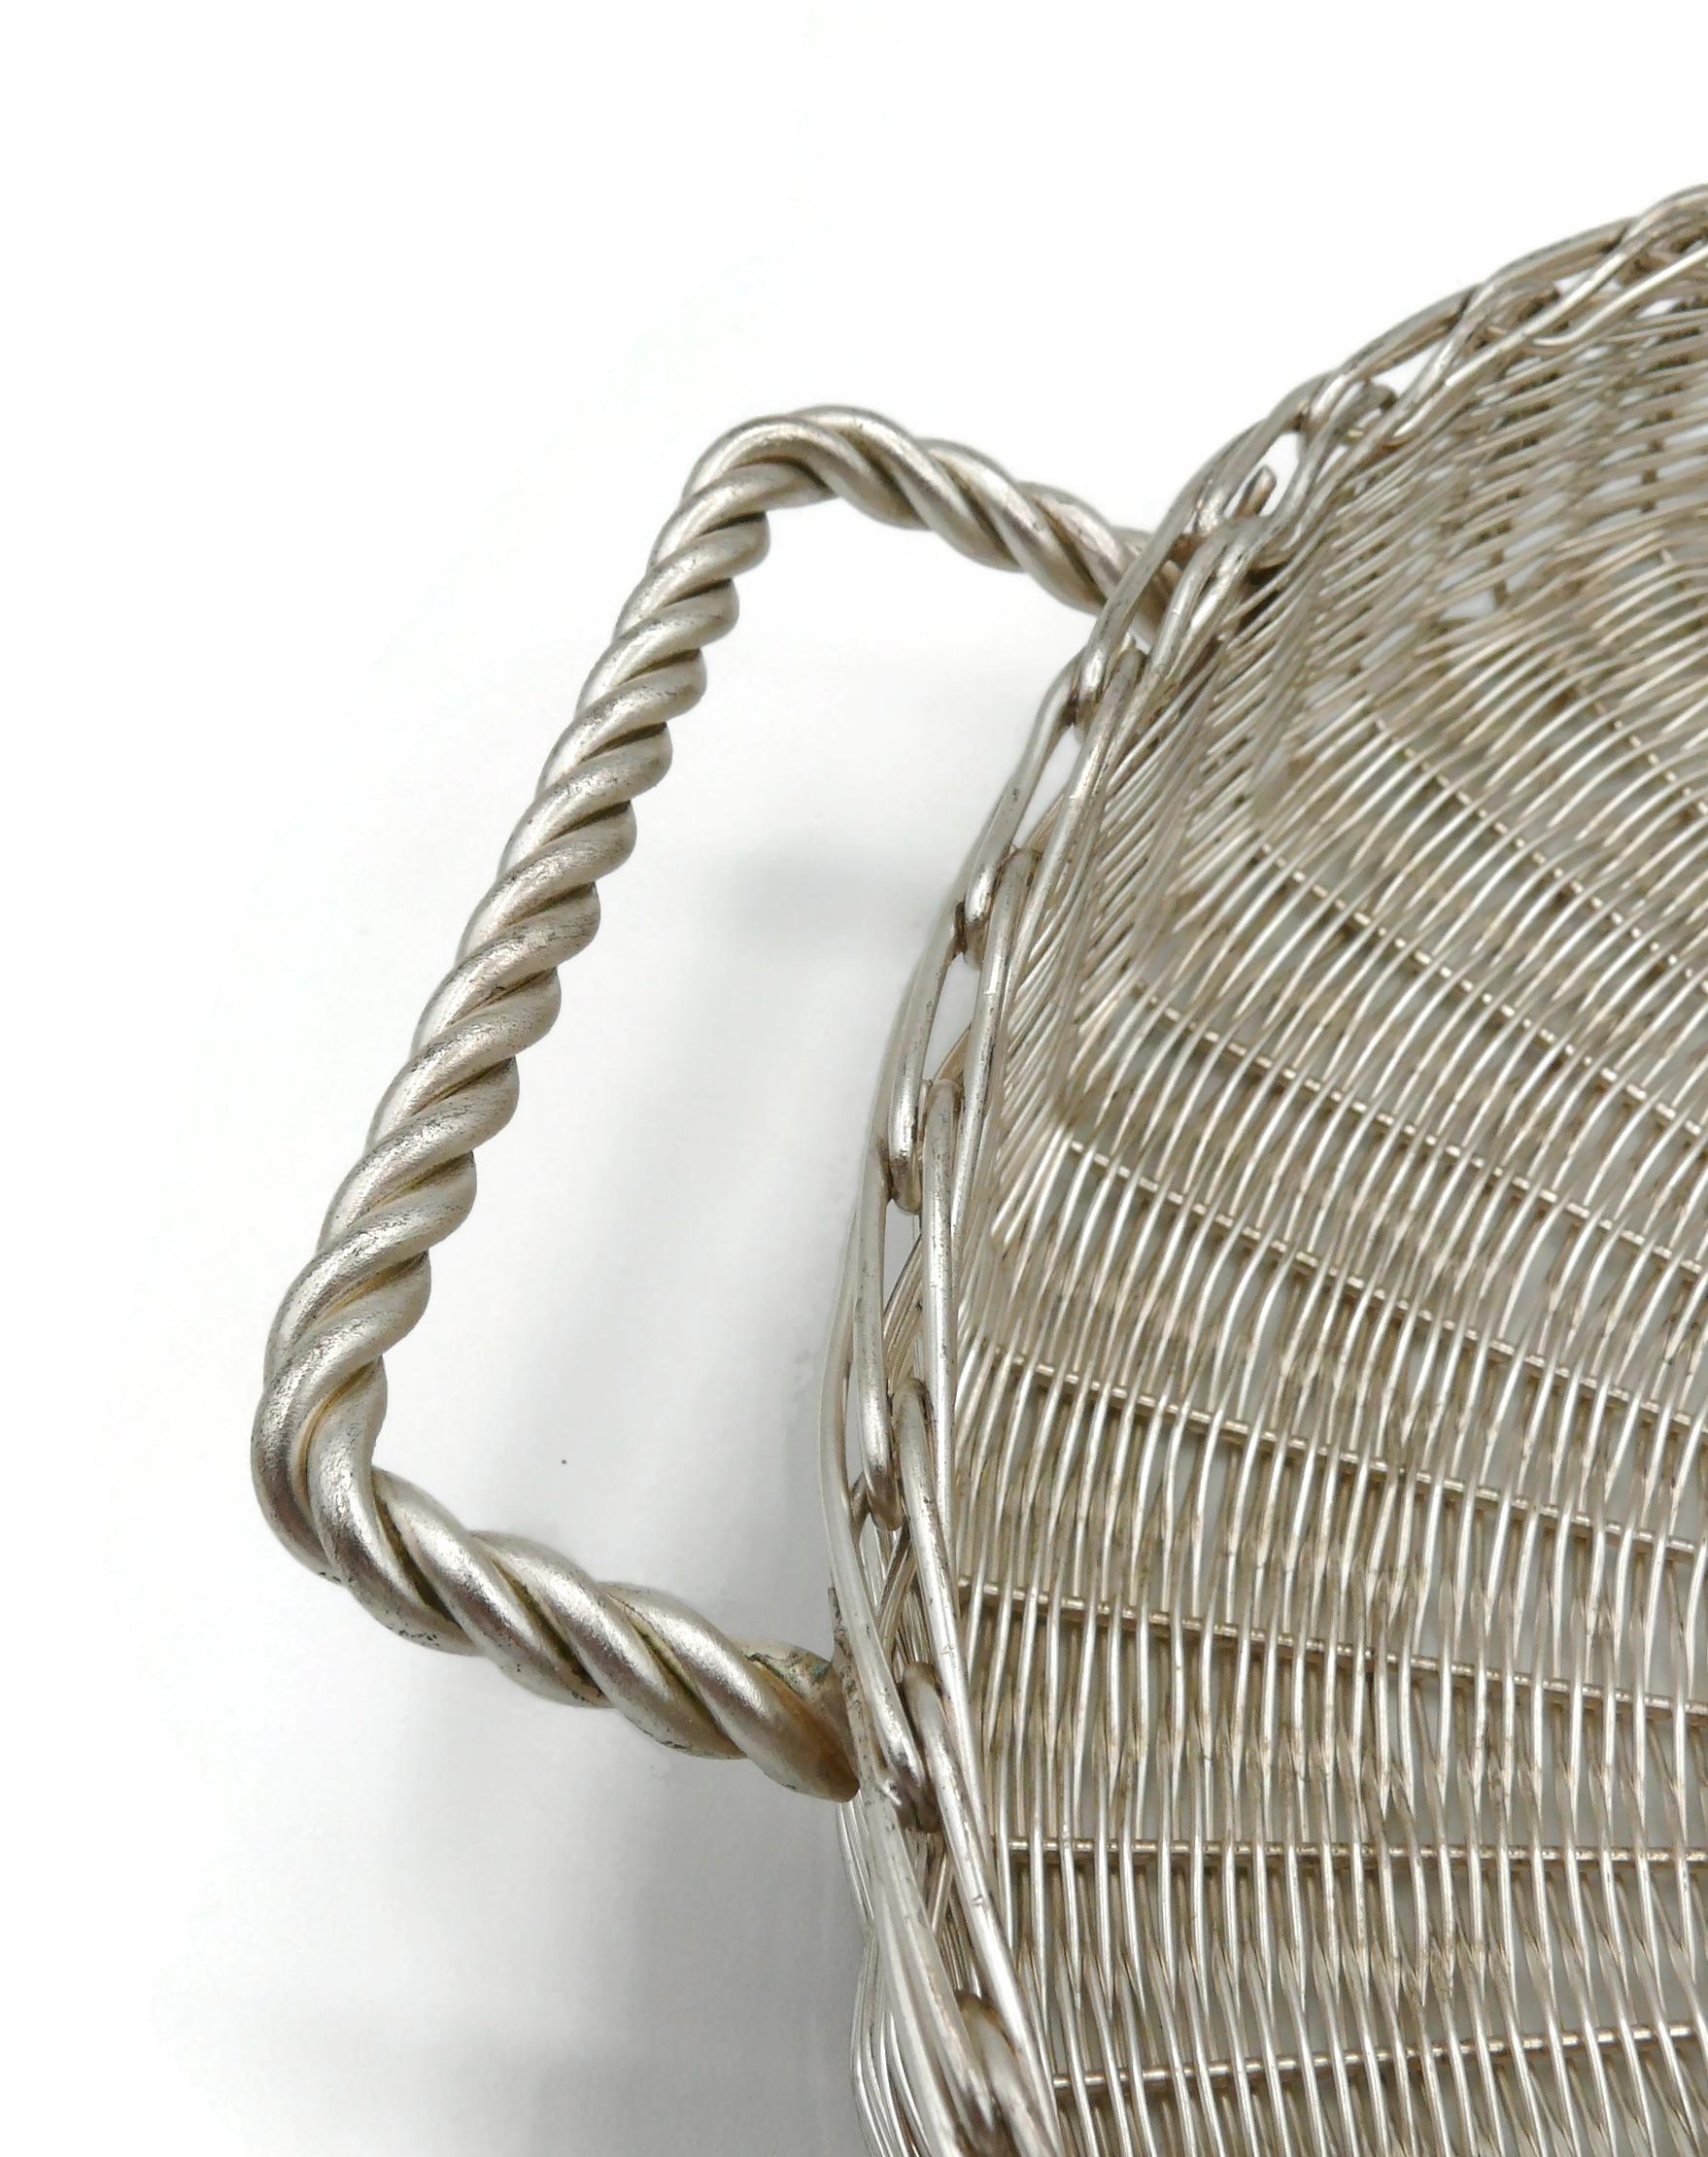 CHRISTIAN DIOR Home Collection Vintage Silver Plated Wicker Style Basket For Sale 4